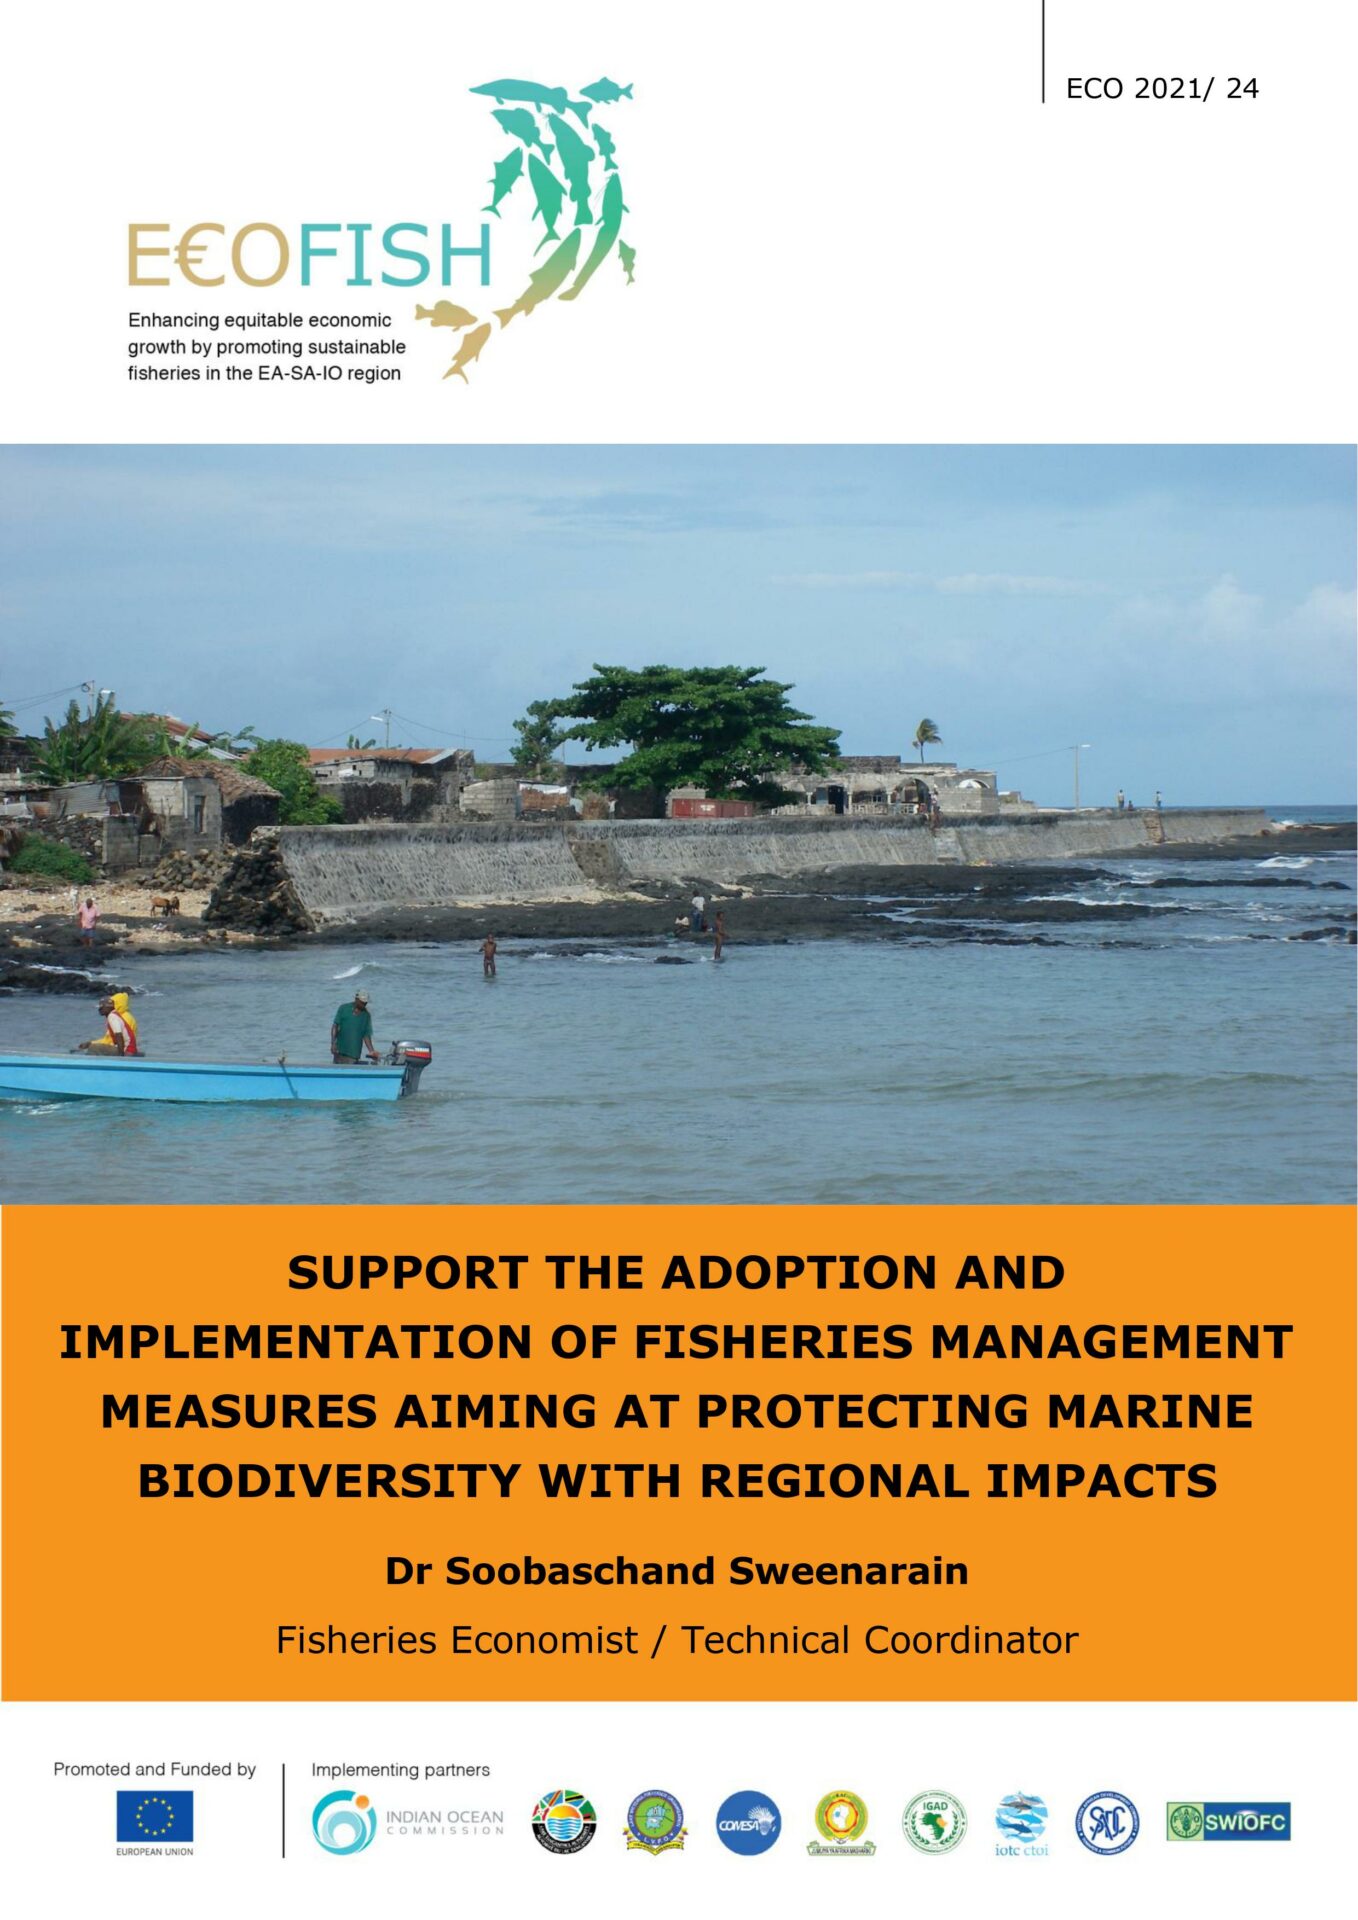 SUPPORT THE ADOPTION AND IMPLEMENTATION OF FISHERIES MANAGEMENT MEASURES AIMING AT PROTECTING MARINE BIODIVERSITY WITH REGIONAL IMPACTS